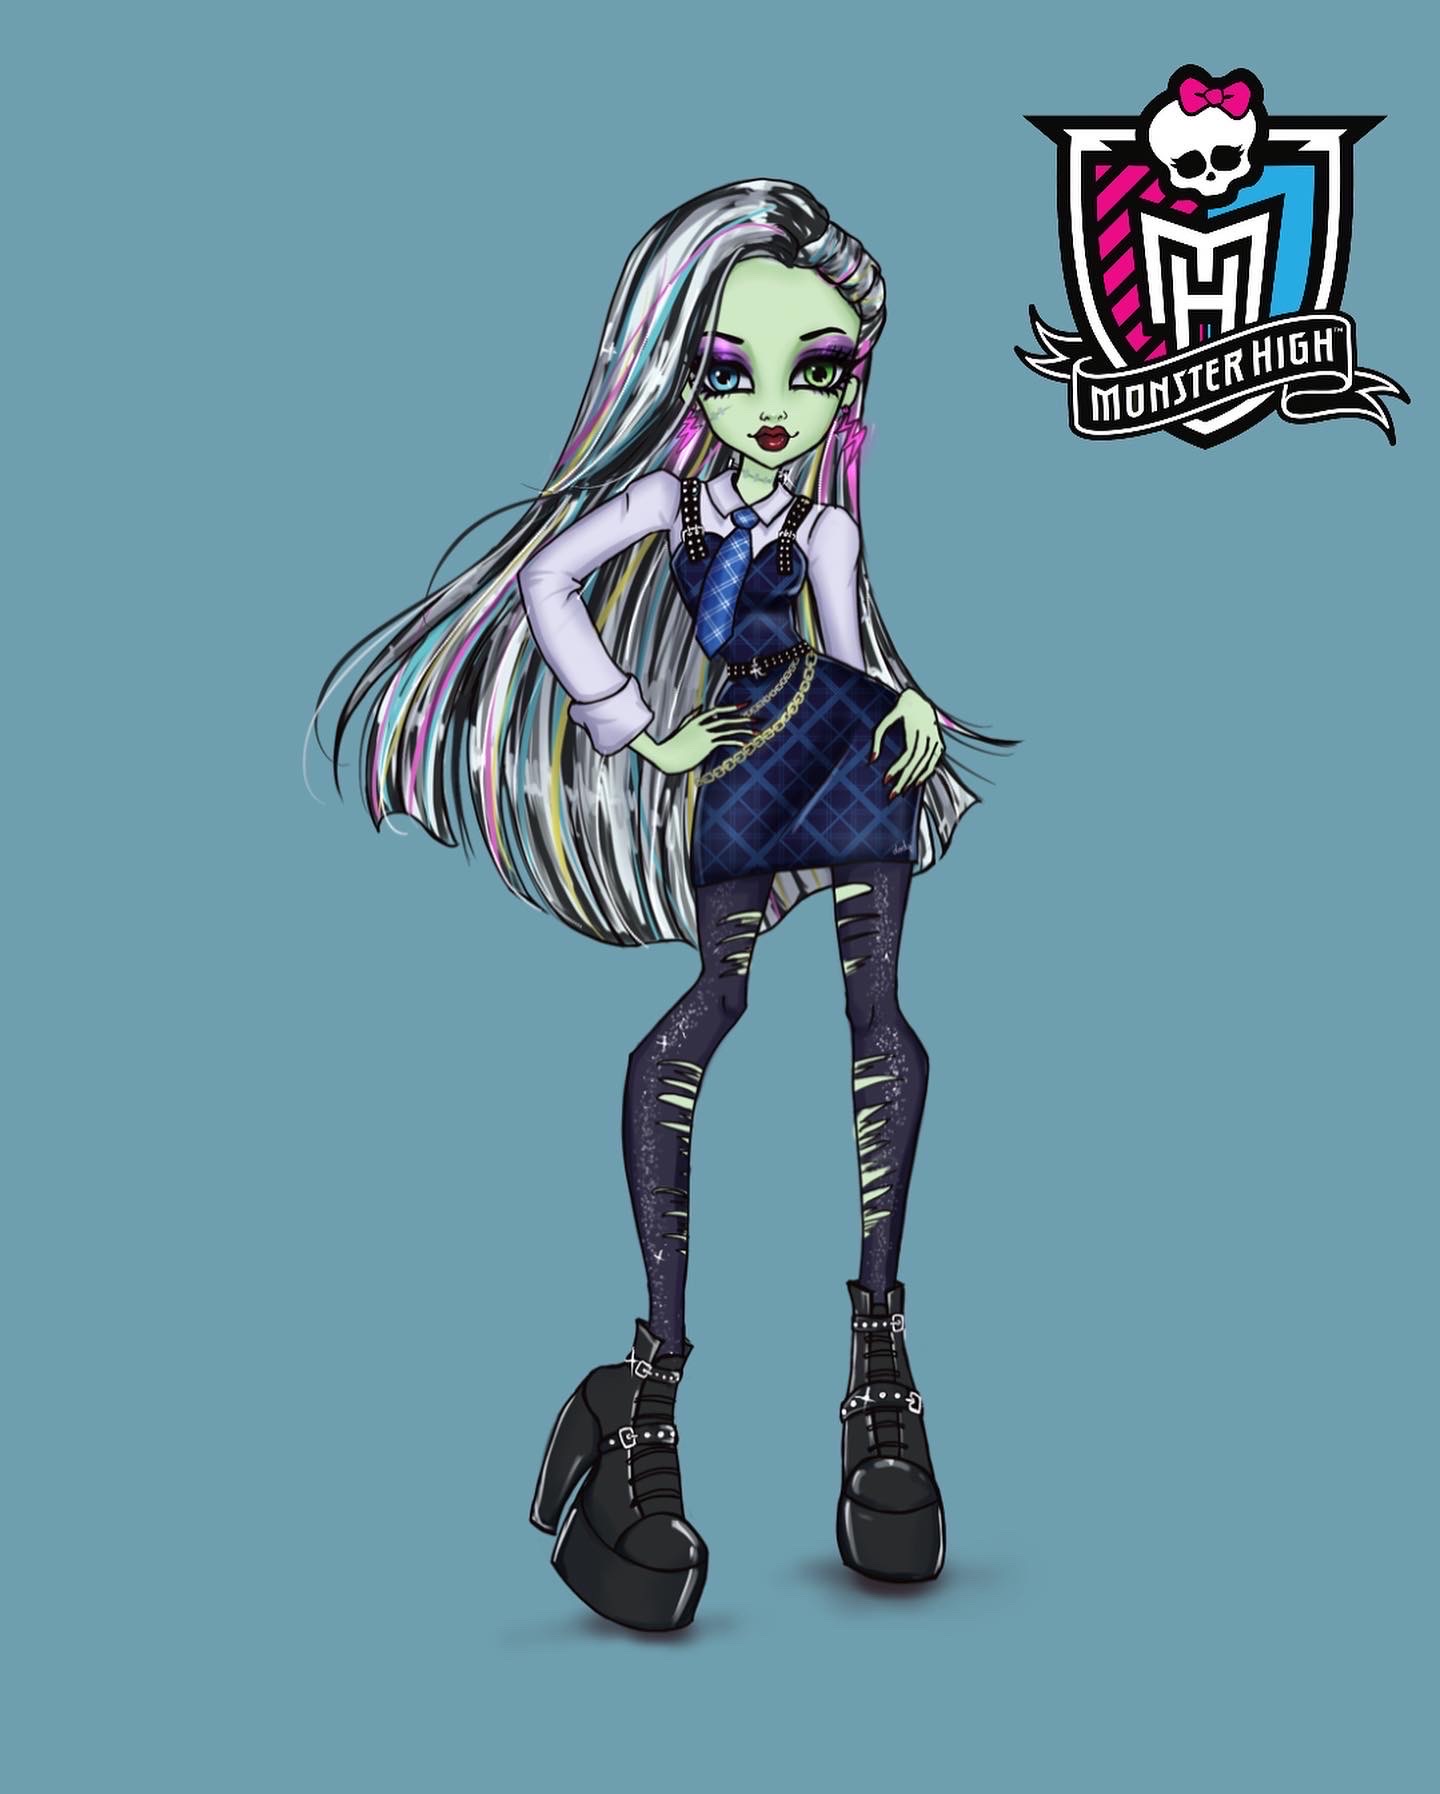 Frankie stein from monster high by Isthatdody on DeviantArt